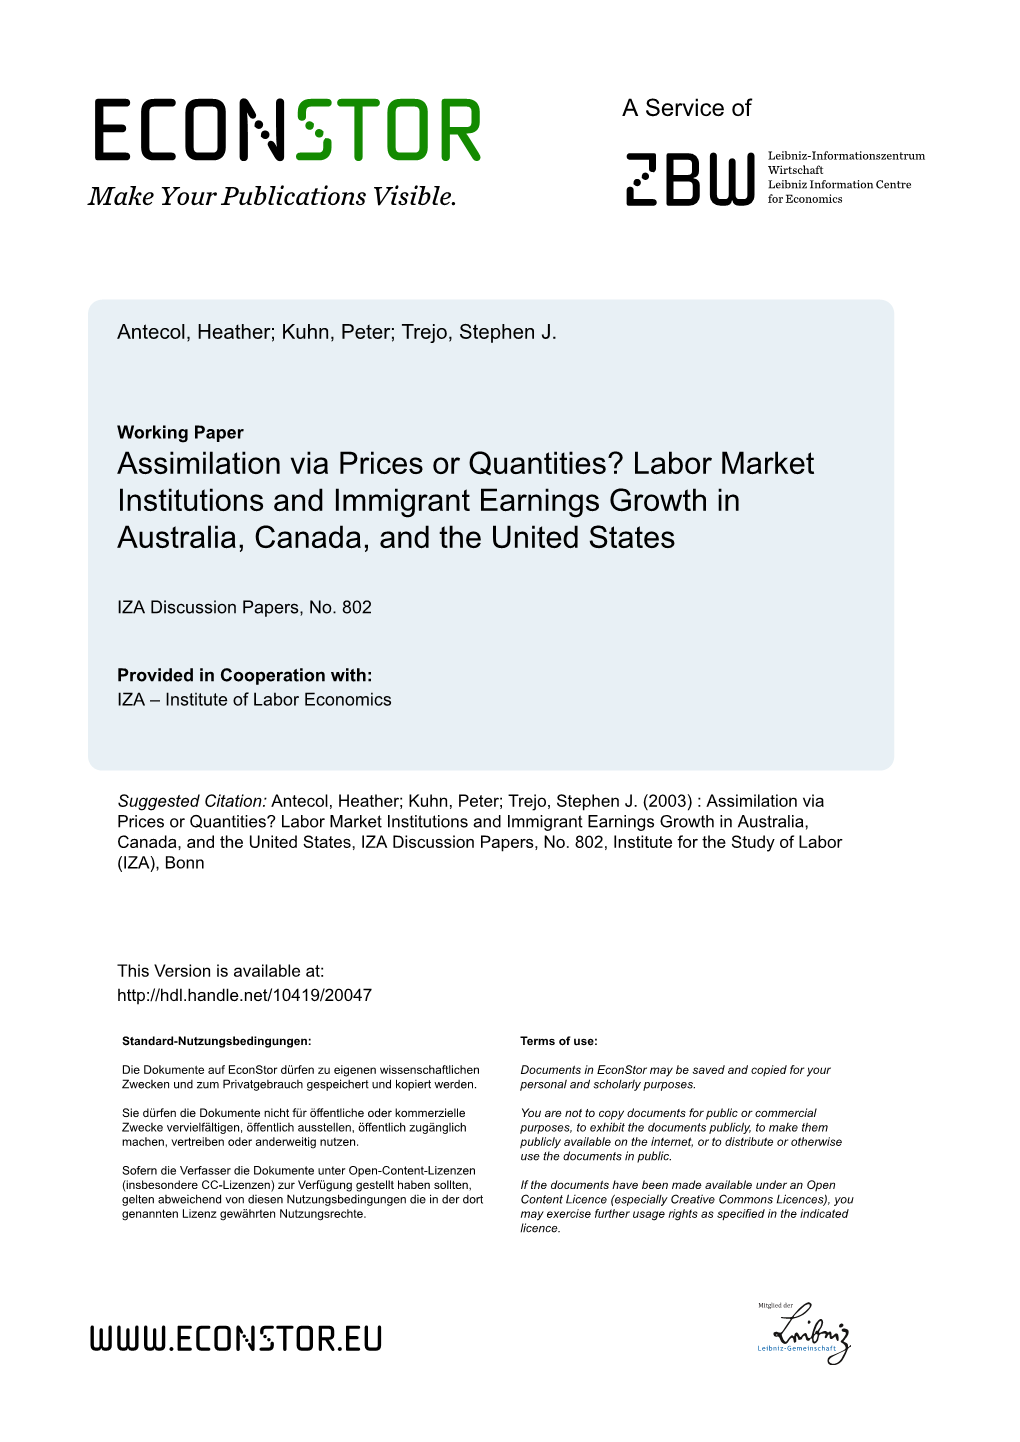 Labor Market Institutions and Immigrant Earnings Growth in Australia, Canada, and the United States